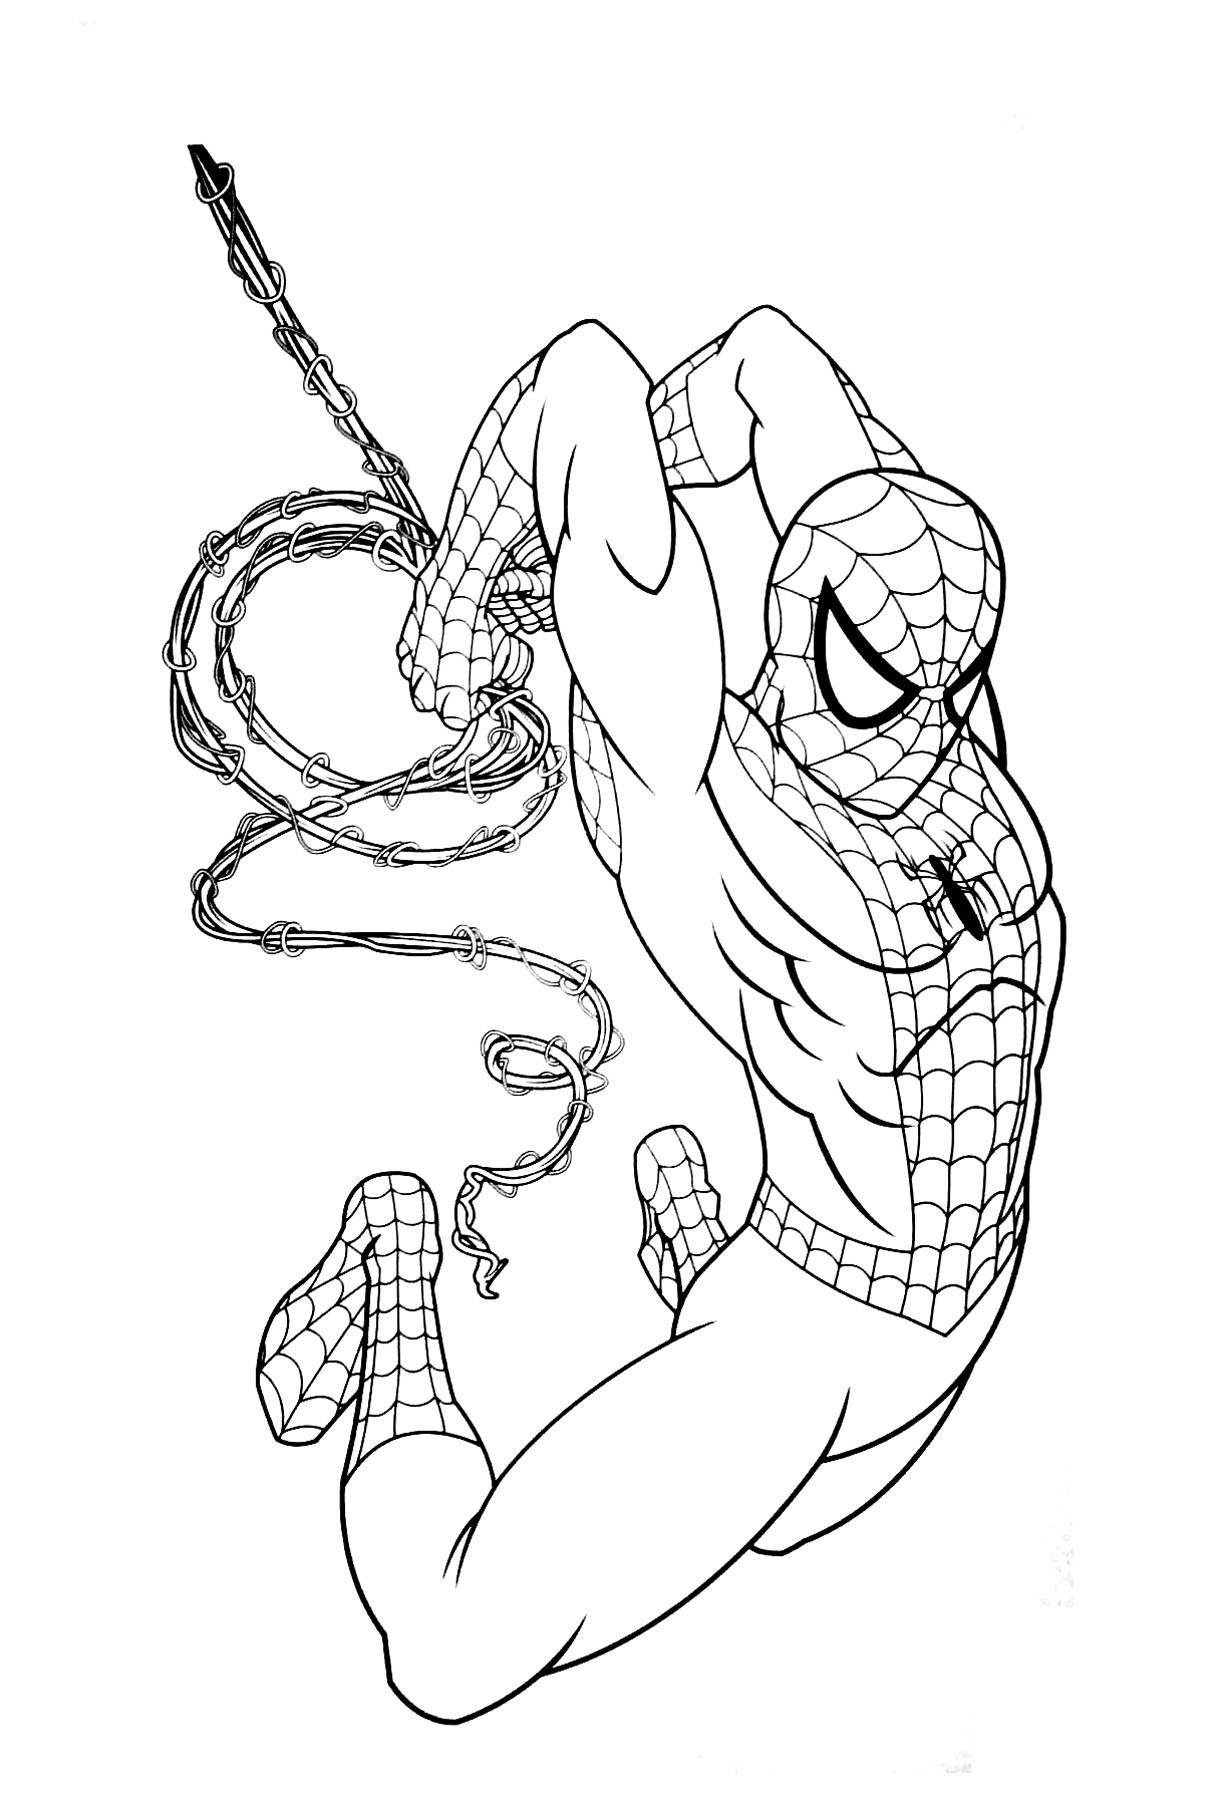 Spiderman Coloring Pages Pdf
 Spiderman Coloring Pages coloringsuite